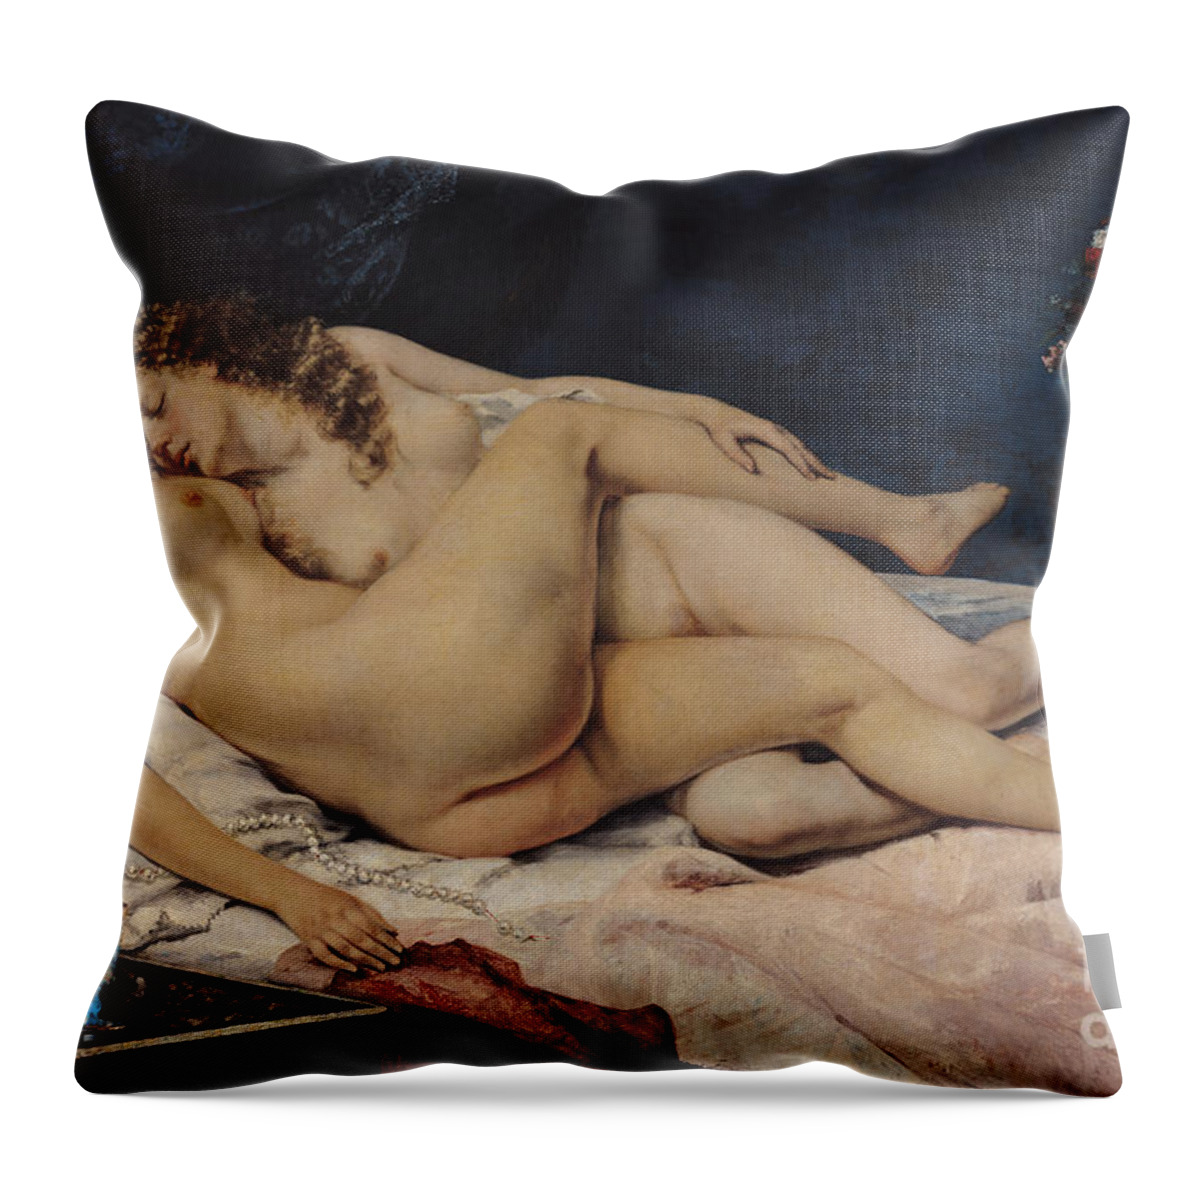 Love Throw Pillow featuring the painting Sleep by Gustave Courbet by Gustave Courbet